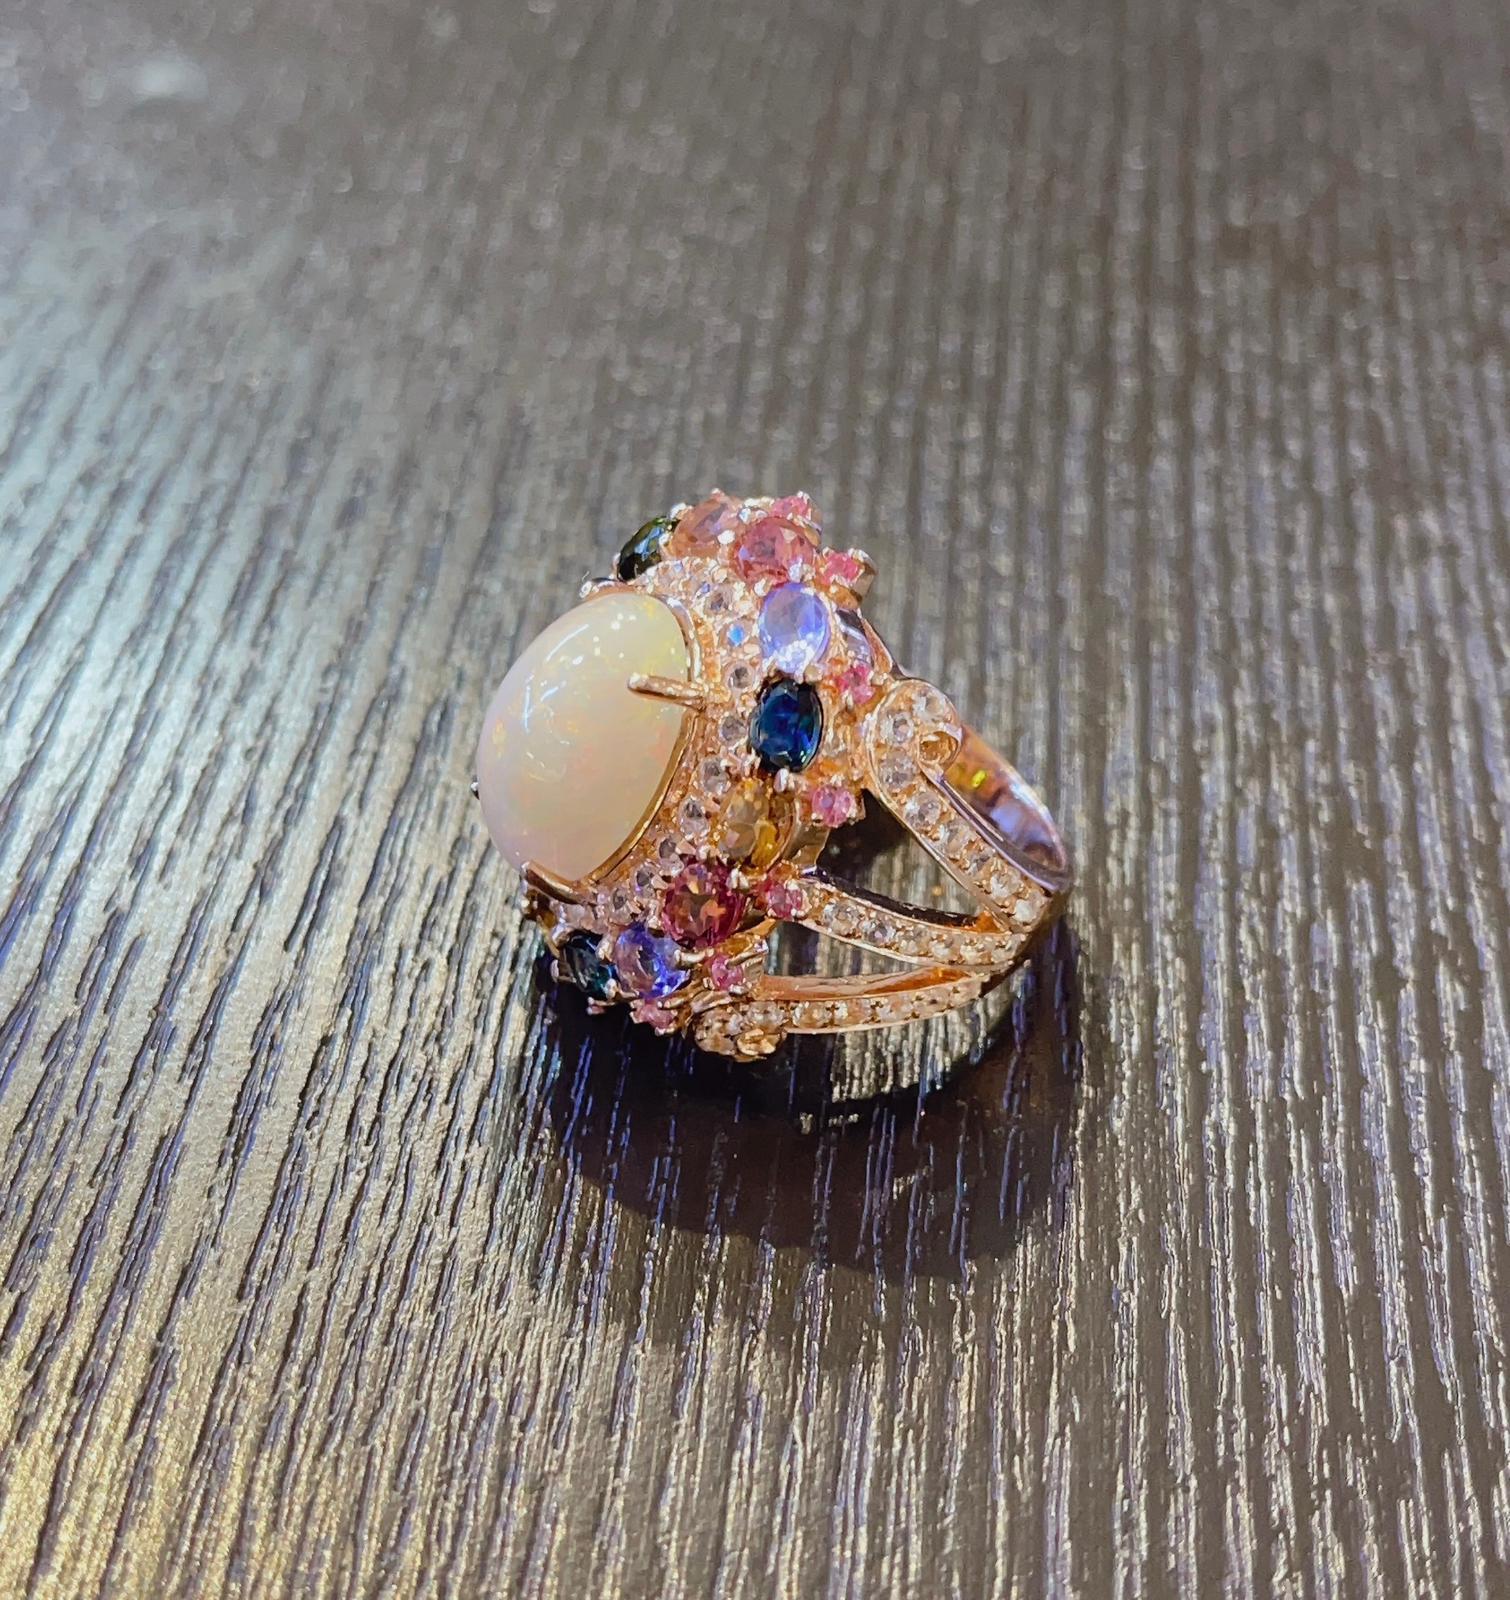 Bochic “Capri” Opal & Multi Color Sapphire Cocktail Ring Set 22K Gold & Silver
Multi natural gem Ring 
Beautiful Natural Opal - 9 carats
White/Cream Color with Pink and Orange tones 
Natural Multi Color Sapphires and Tourmaline from Sri Lanka and